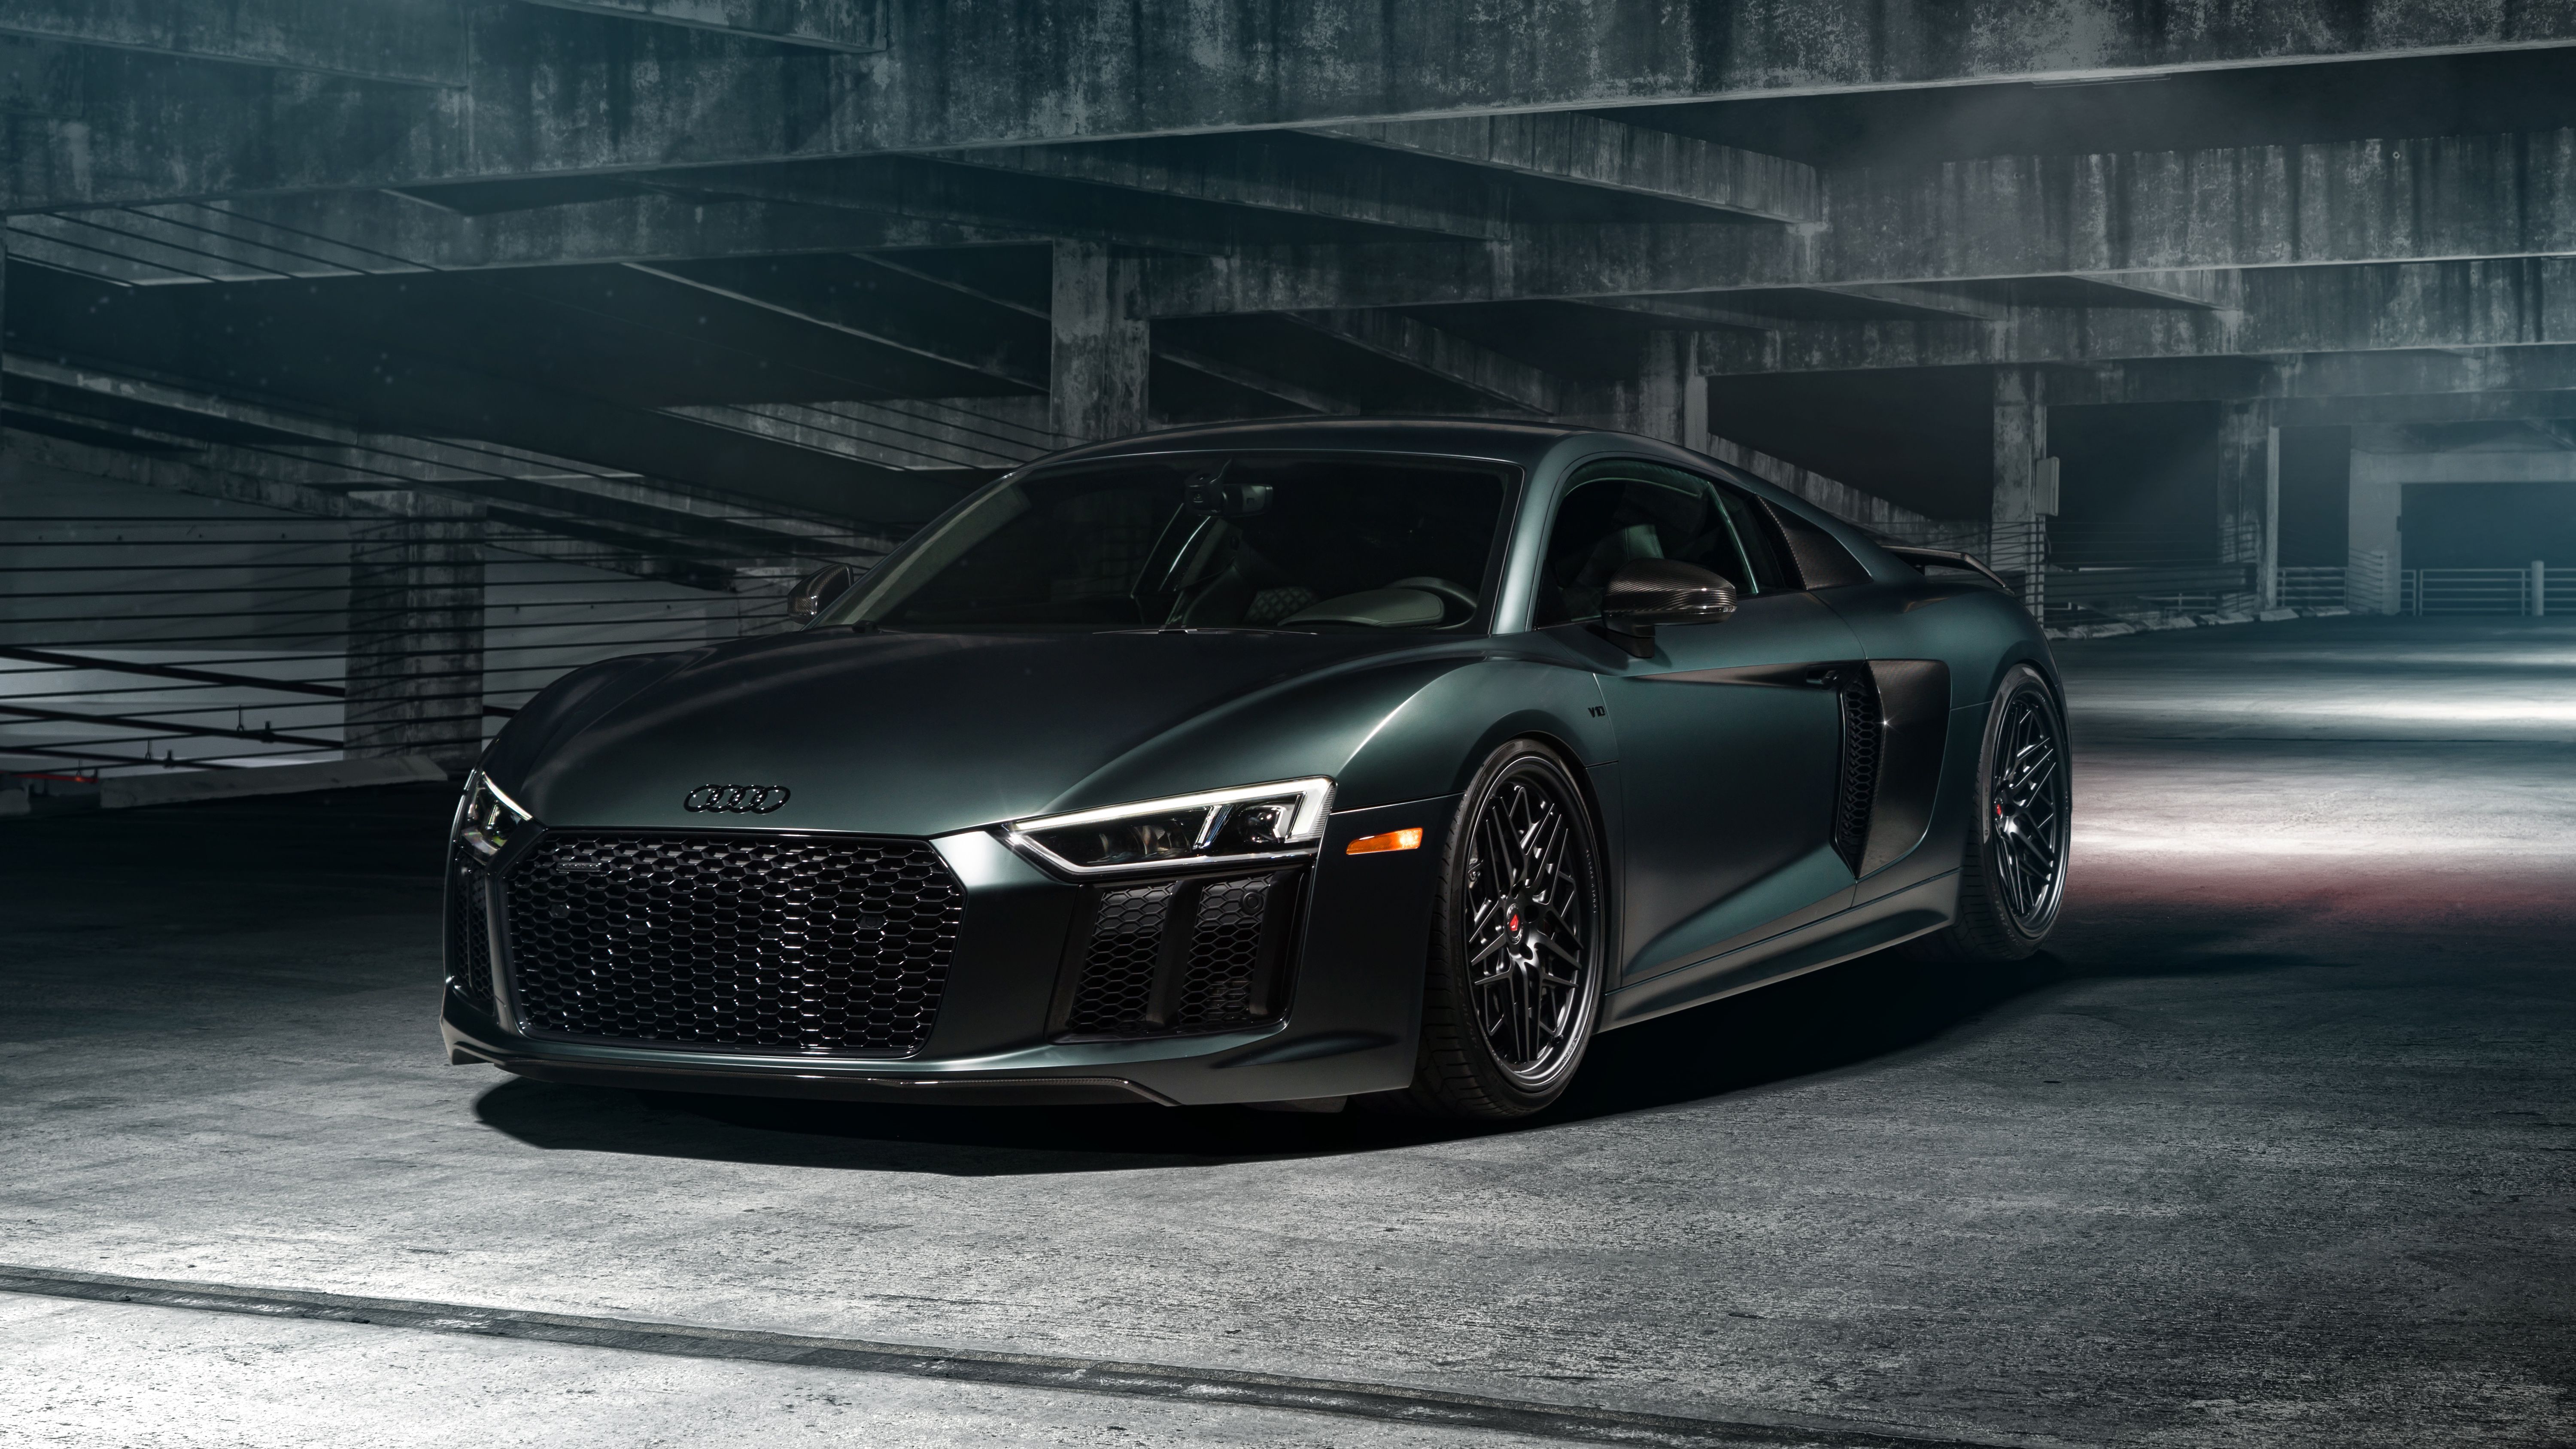 Audi R8 Gt Coupe Wallpapers